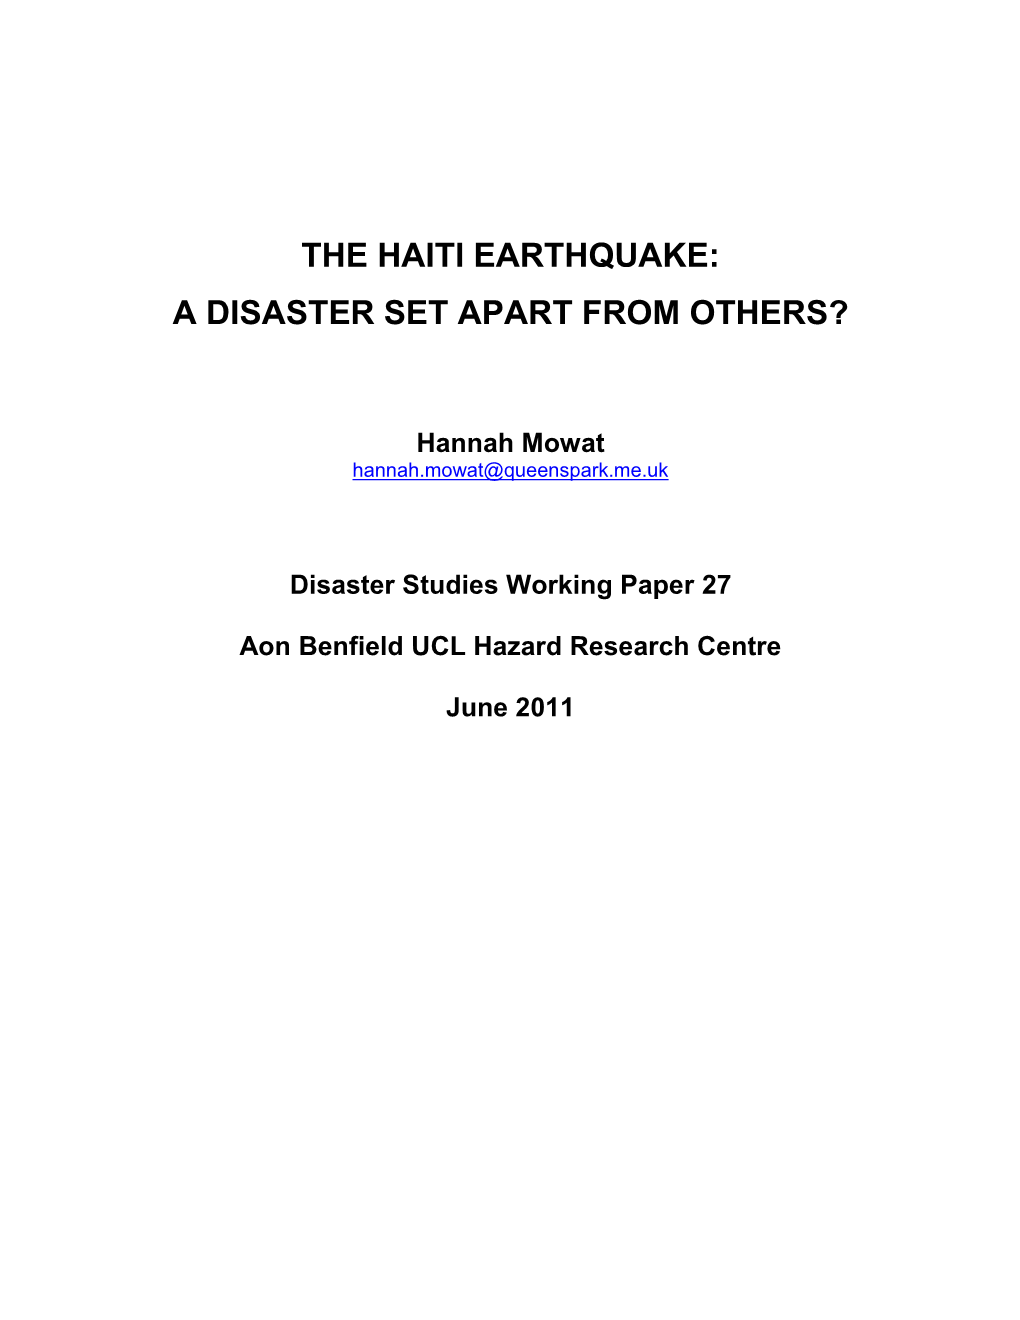 The Haiti Earthquake: a Disaster Set Apart from Others?